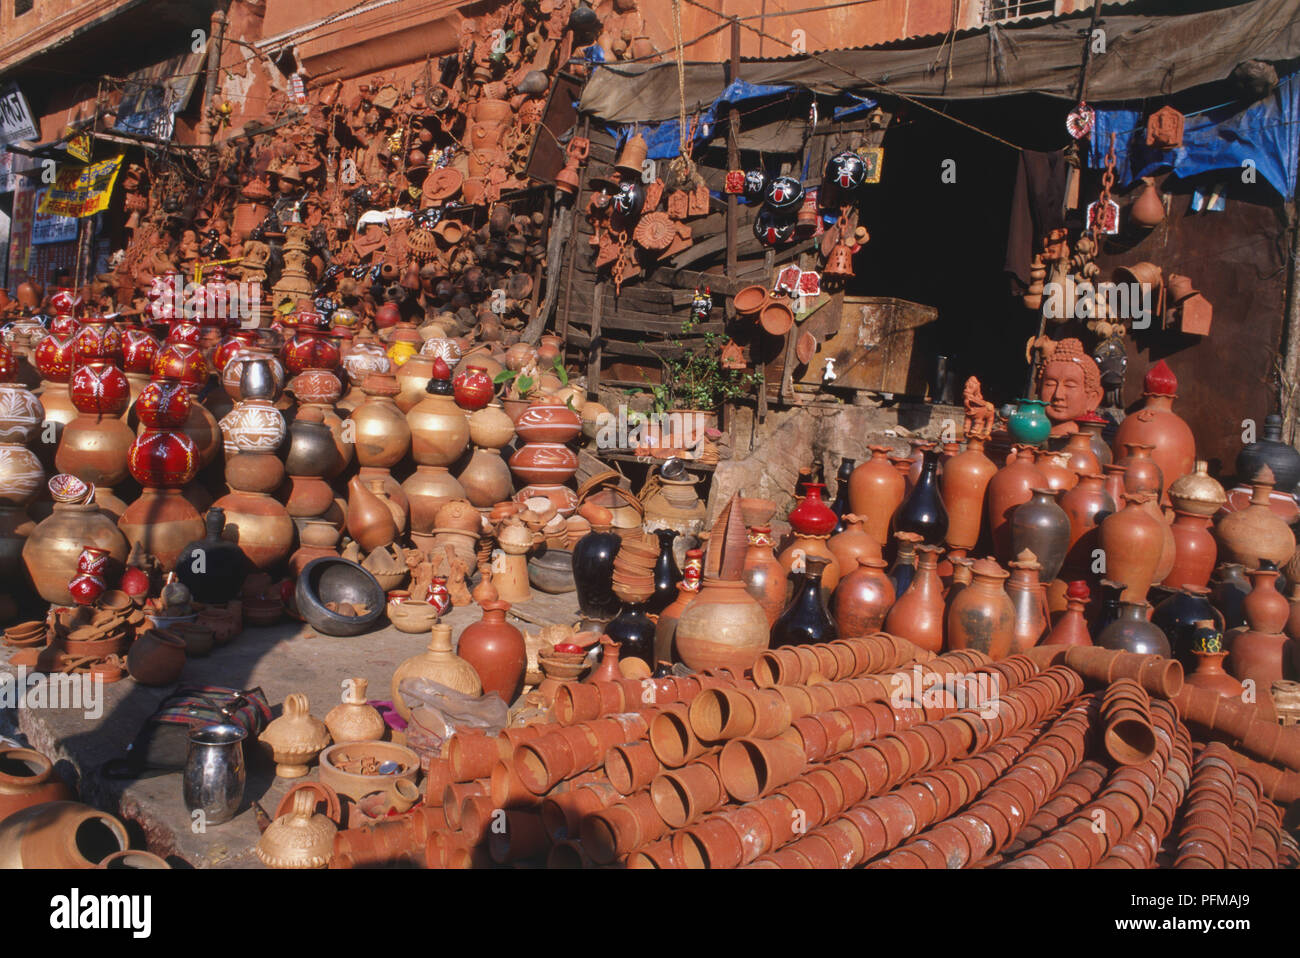 India, attractive terracotta pots on display, for sale outside, wide array of shapes and sizes, some pots painted red, black with white detsil, terracotta flower pots in line, tarpaulin covering some stock. Stock Photo